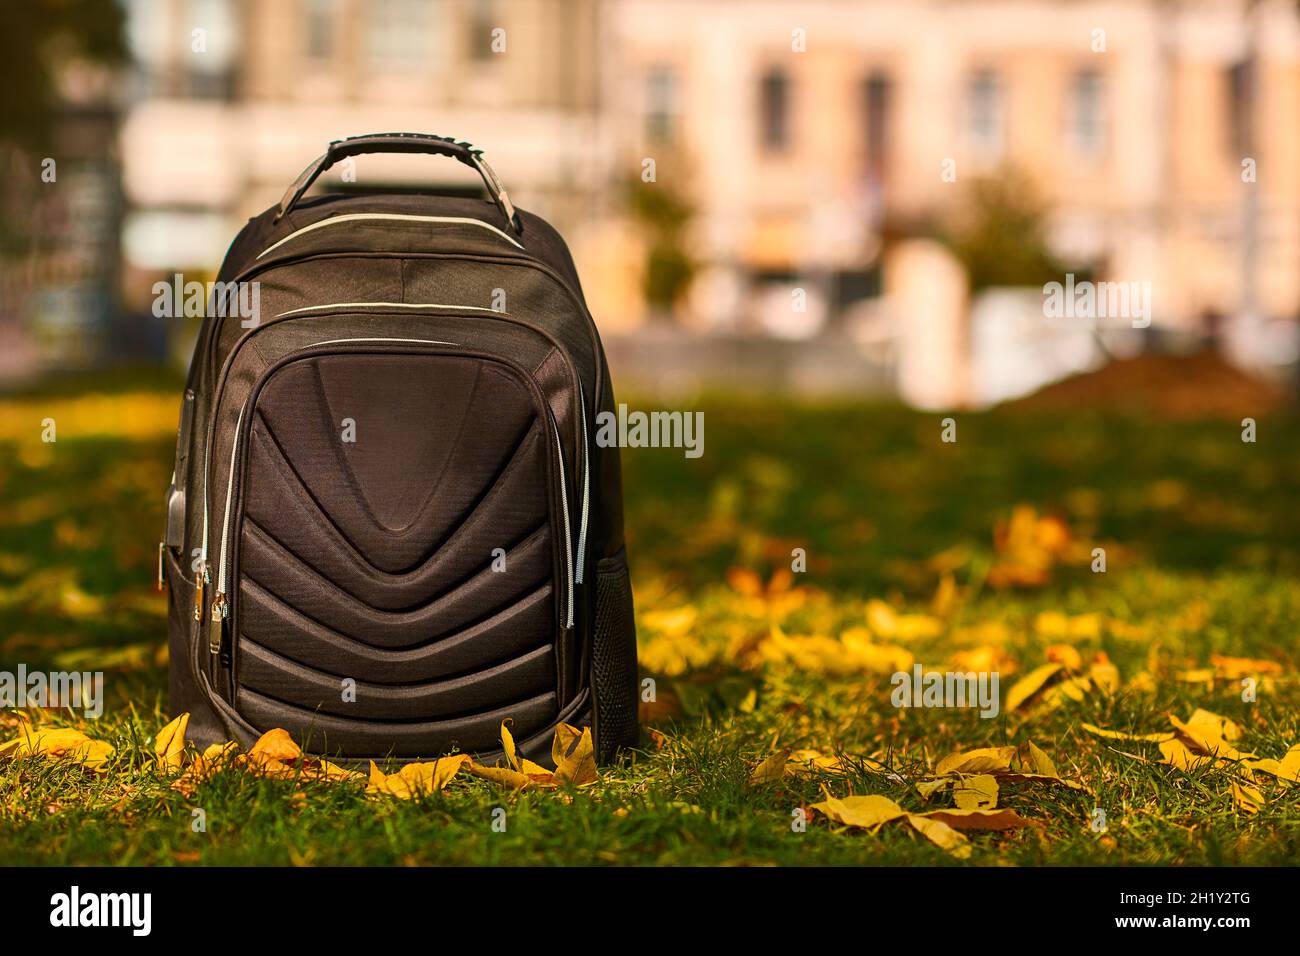 tourist or school black backpack stands on green grass with fallen yellow leaves Stock Photo